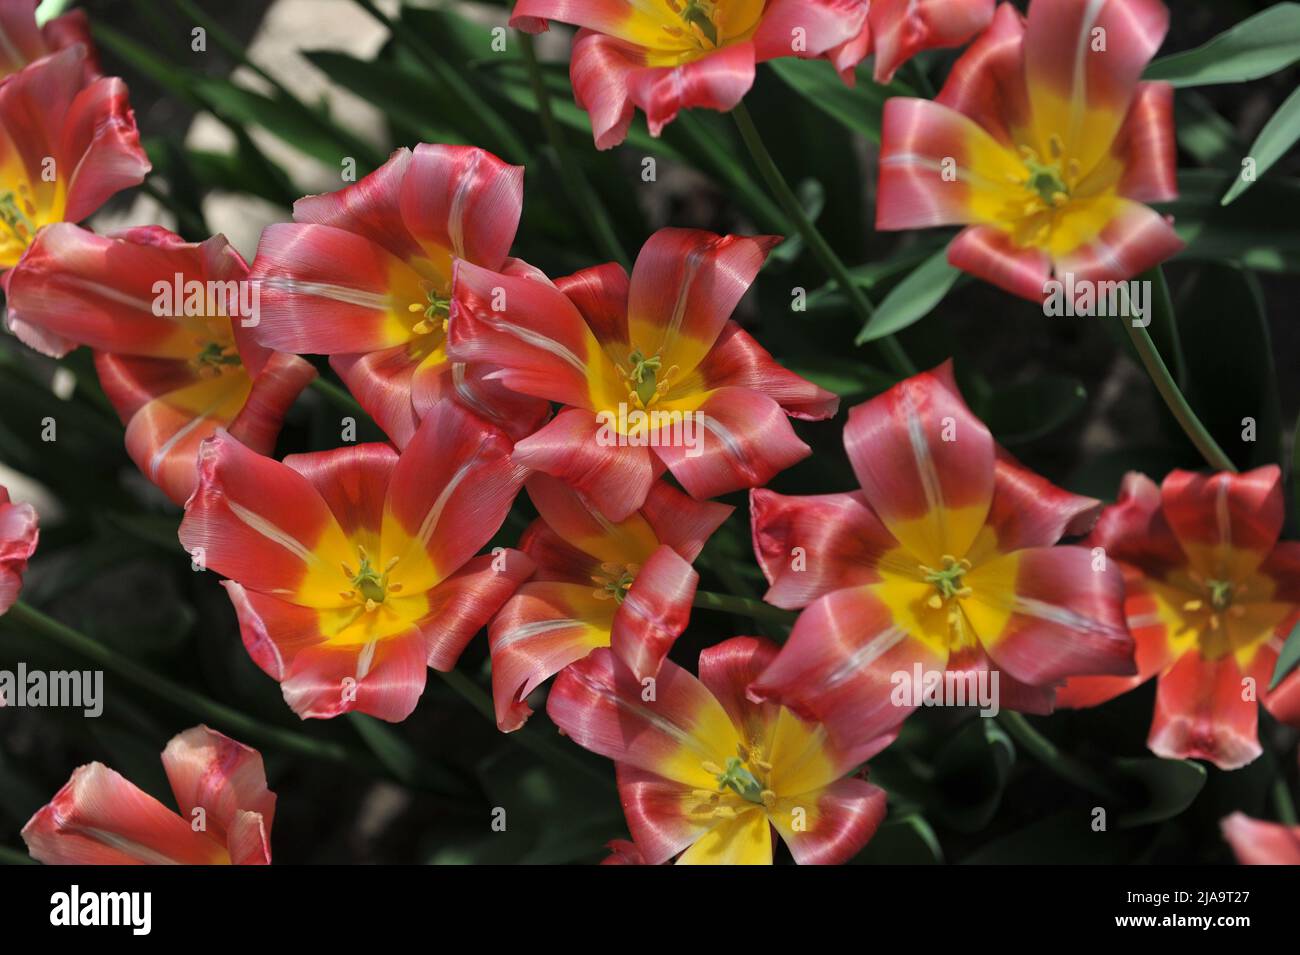 Copper-red and yellow Triump tulips (Tulipa) Ninja bloom in a garden in April Stock Photo